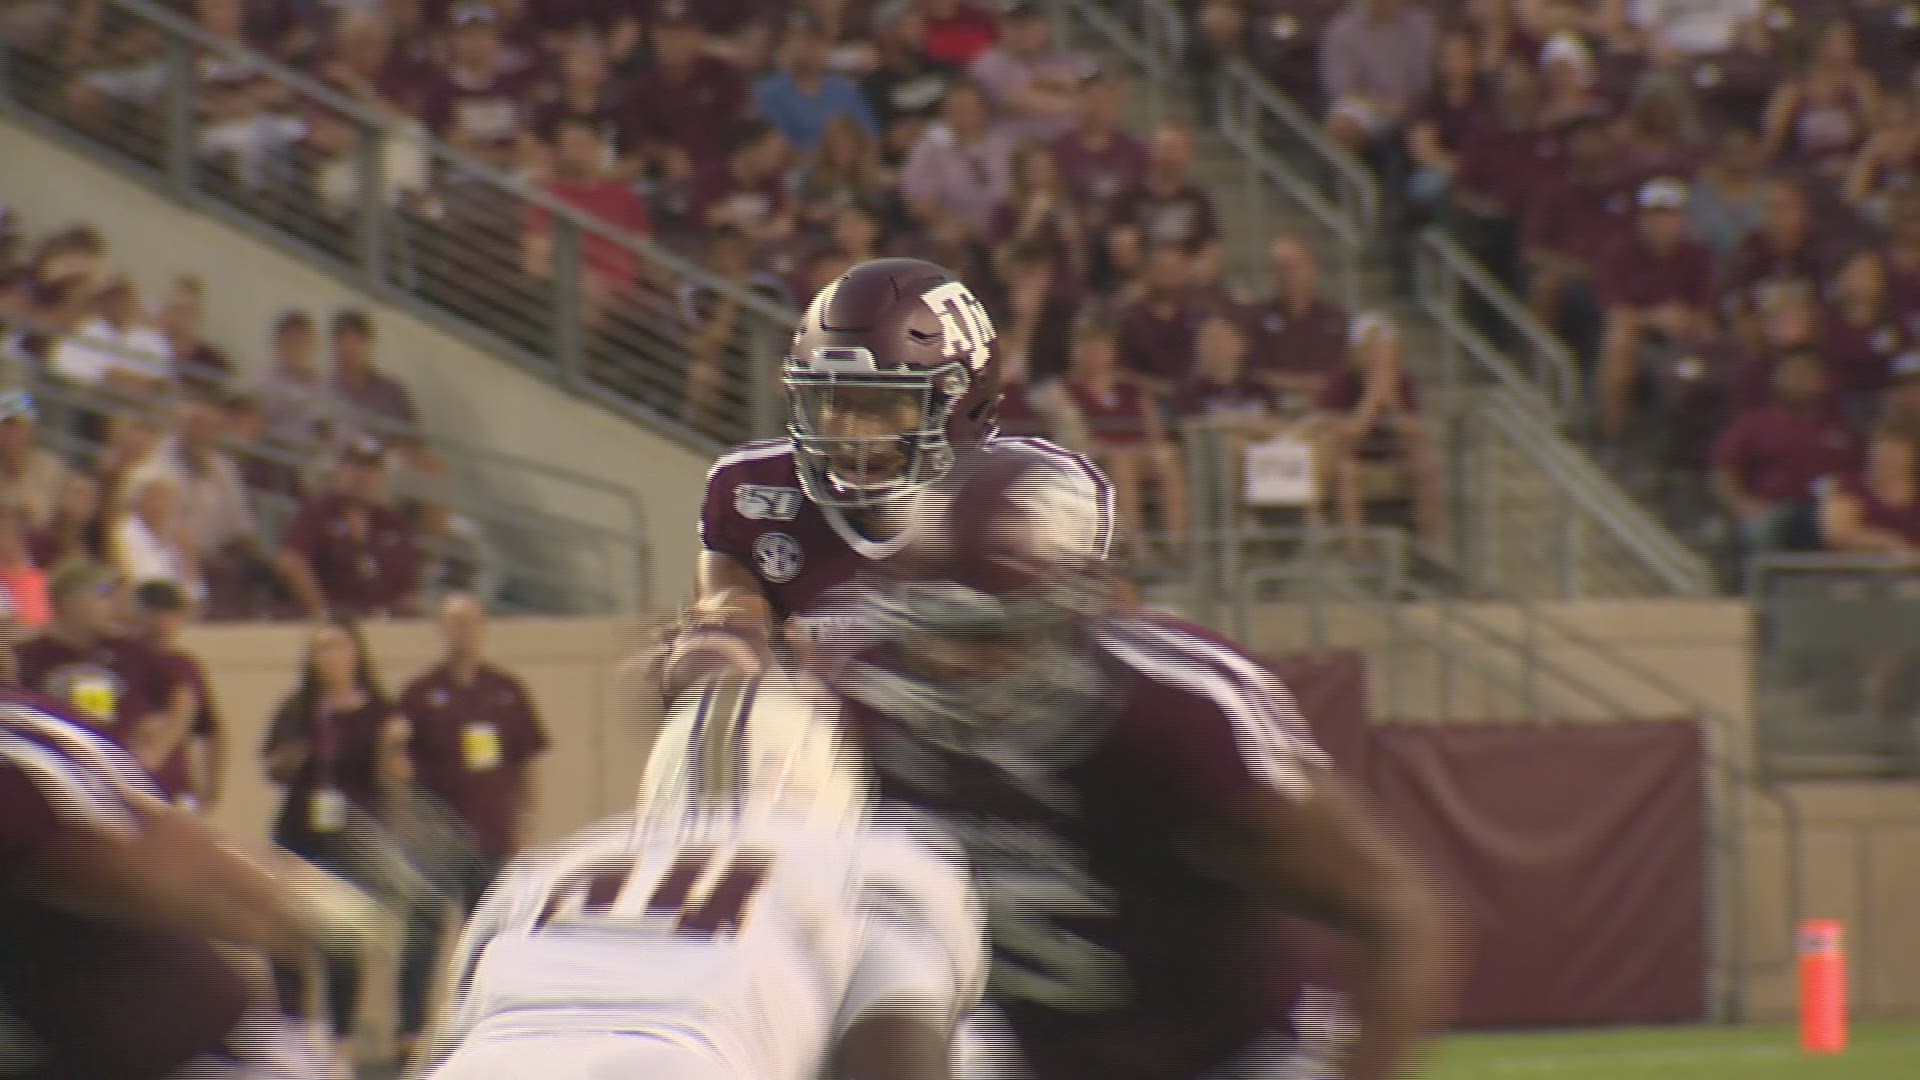 Here are the highlights of the Texas A&M-Texas State game, where the Aggies defeated the Bobcats 41-7 at Kyle Field in College Station.